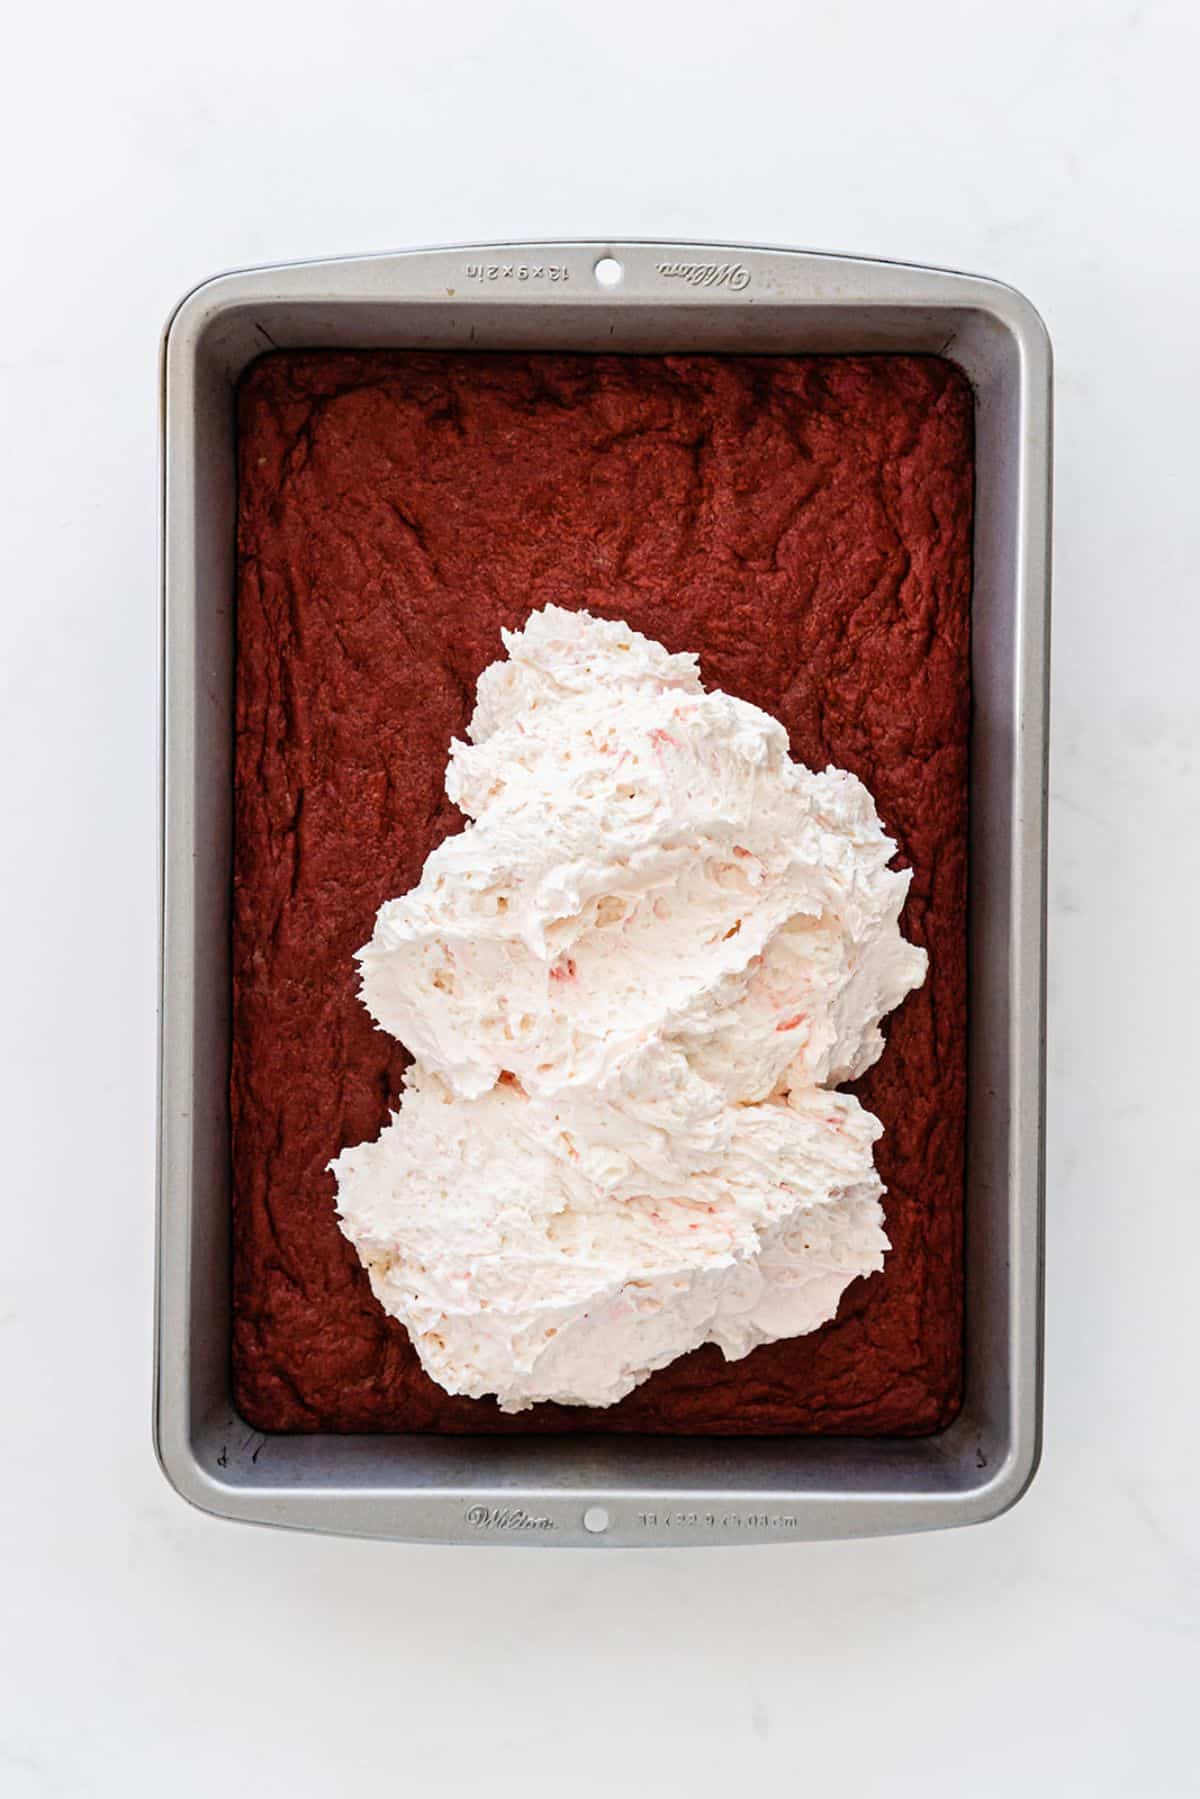 The cream cheese mixture is spread on top of the brownies.